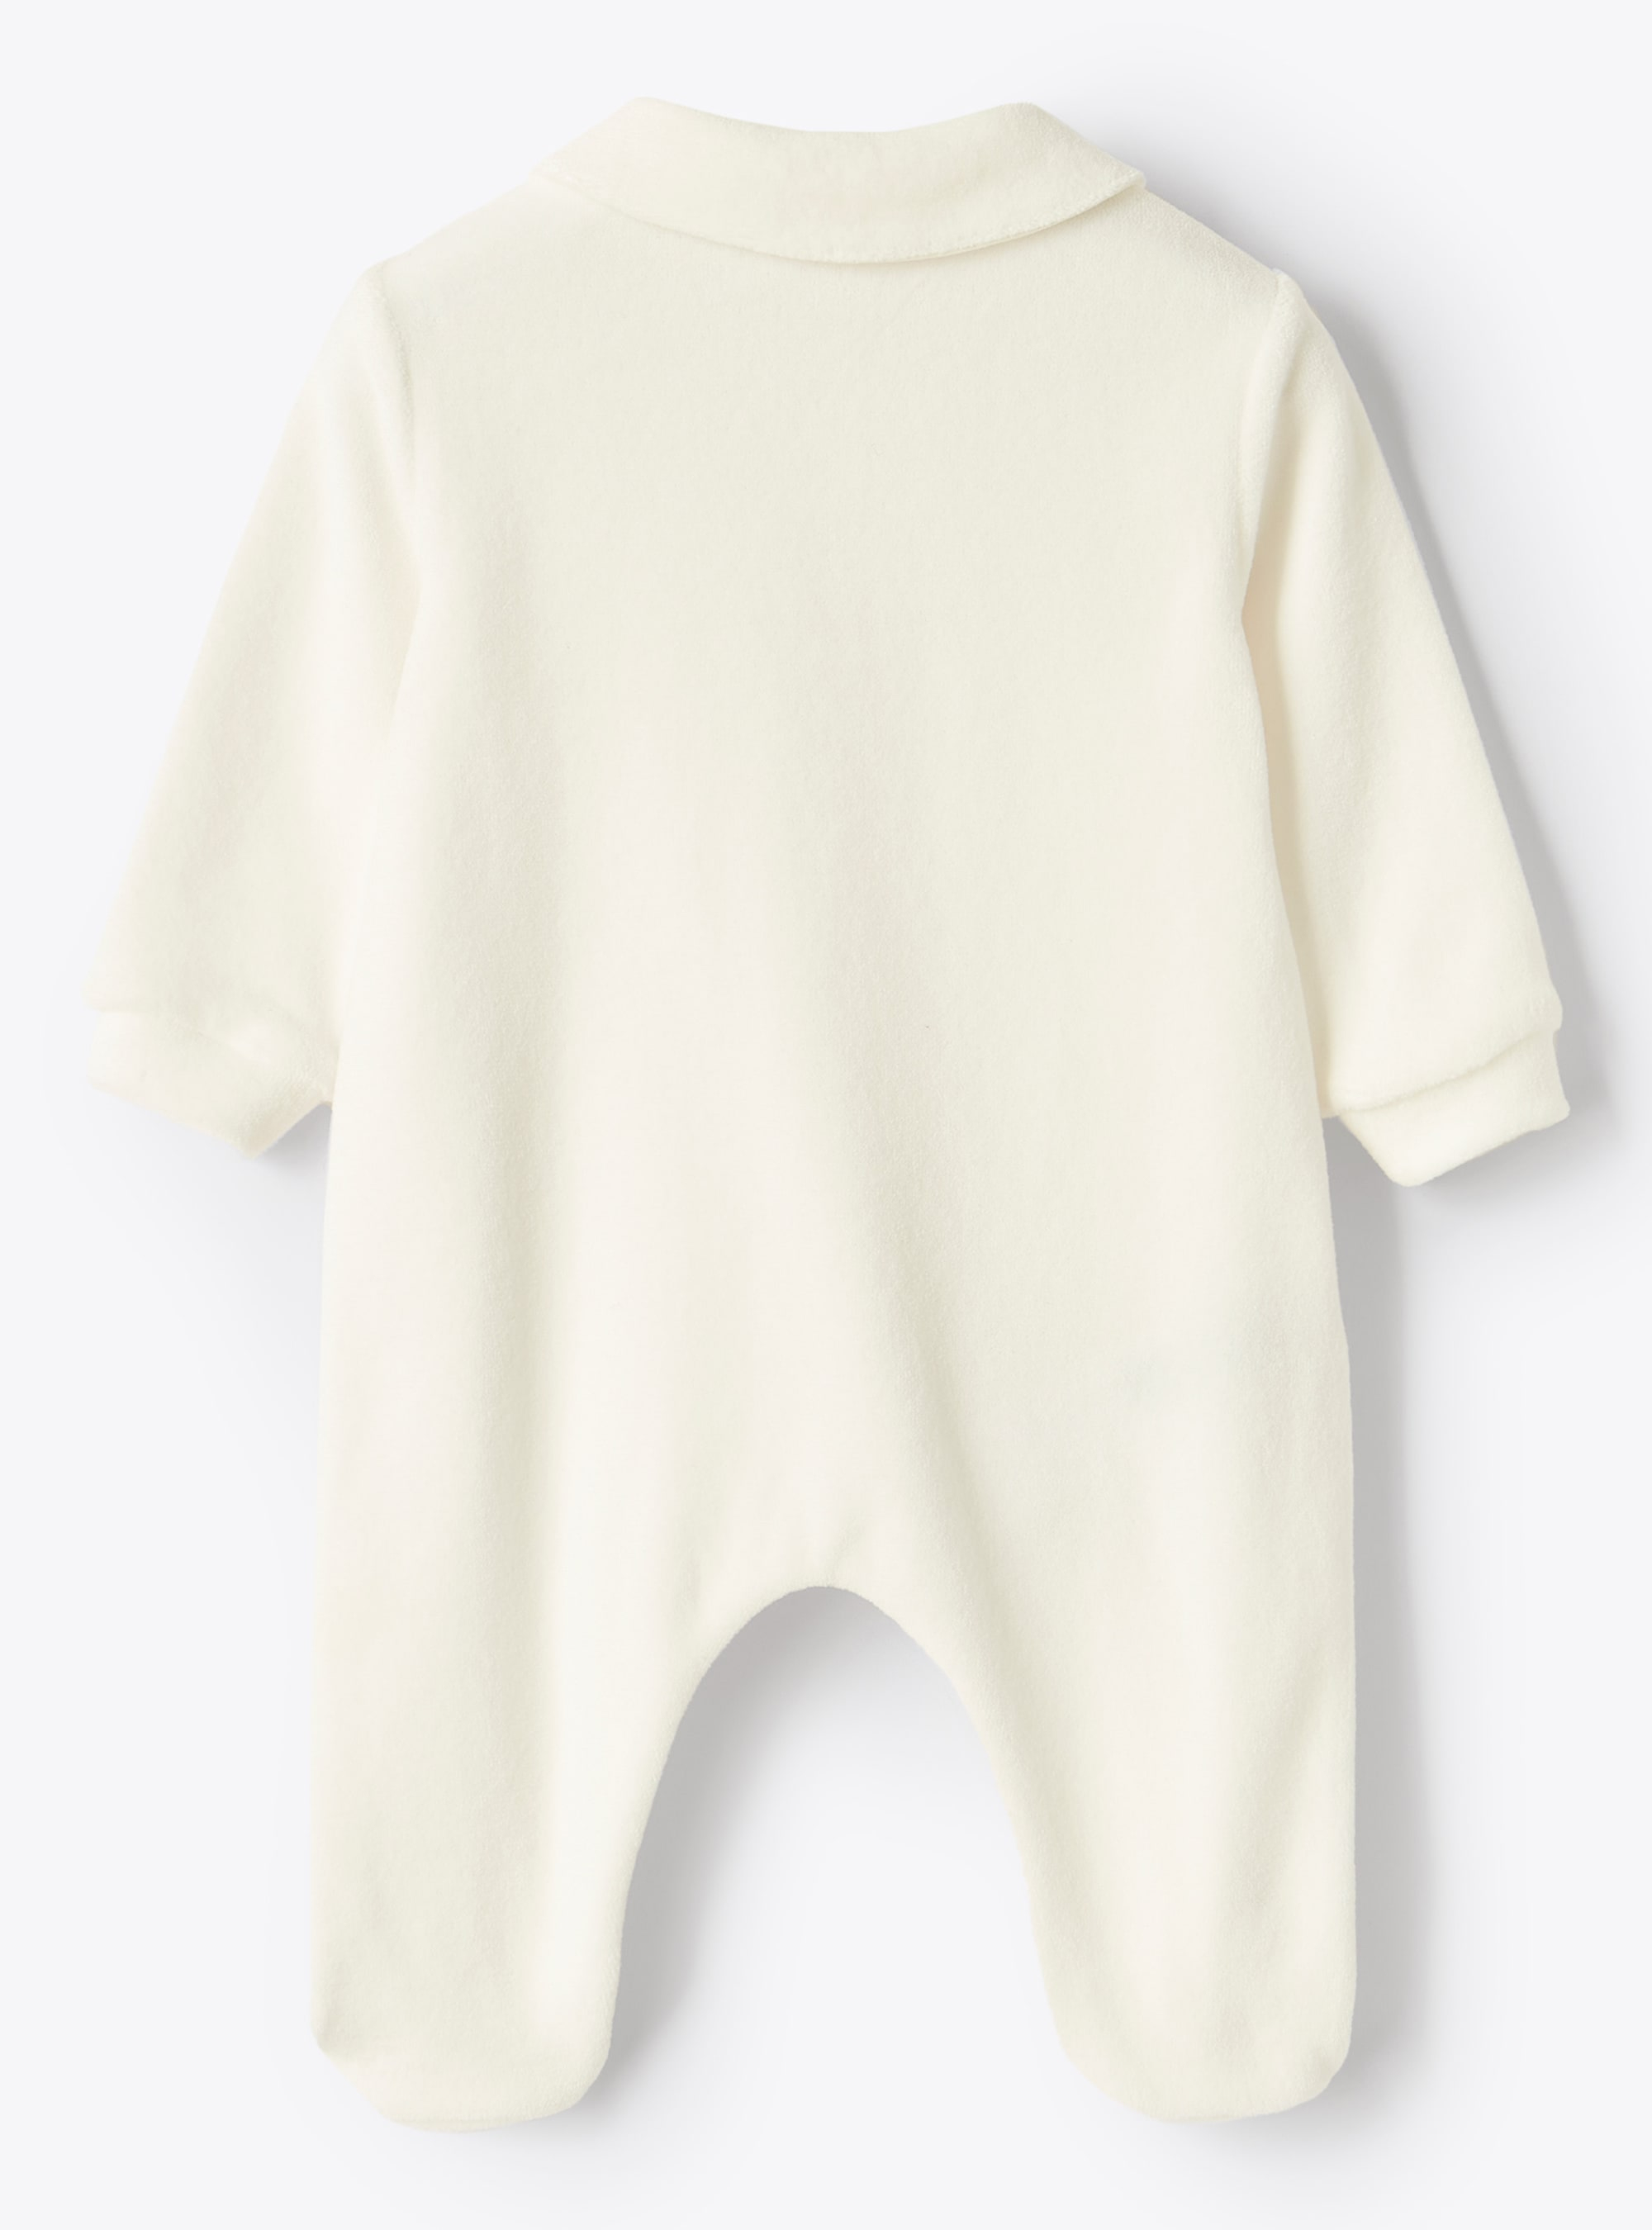 Chenille babysuit with sheep - White | Il Gufo